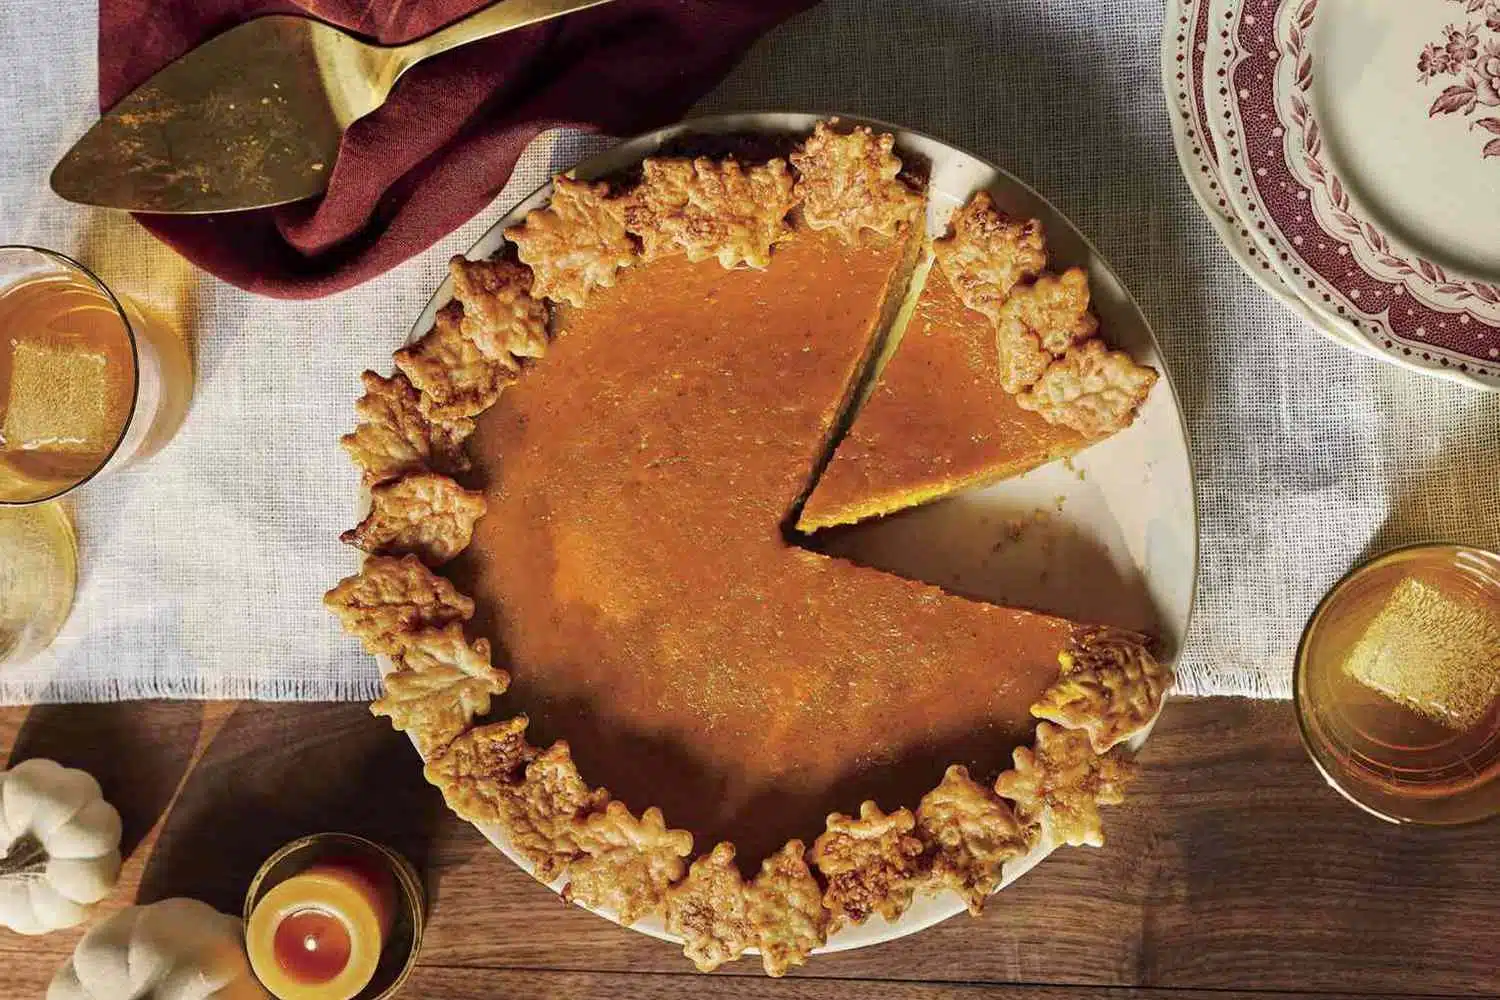 Effortless Elegance: Simple Yet Stunning Pie Recipes for Every Occasion